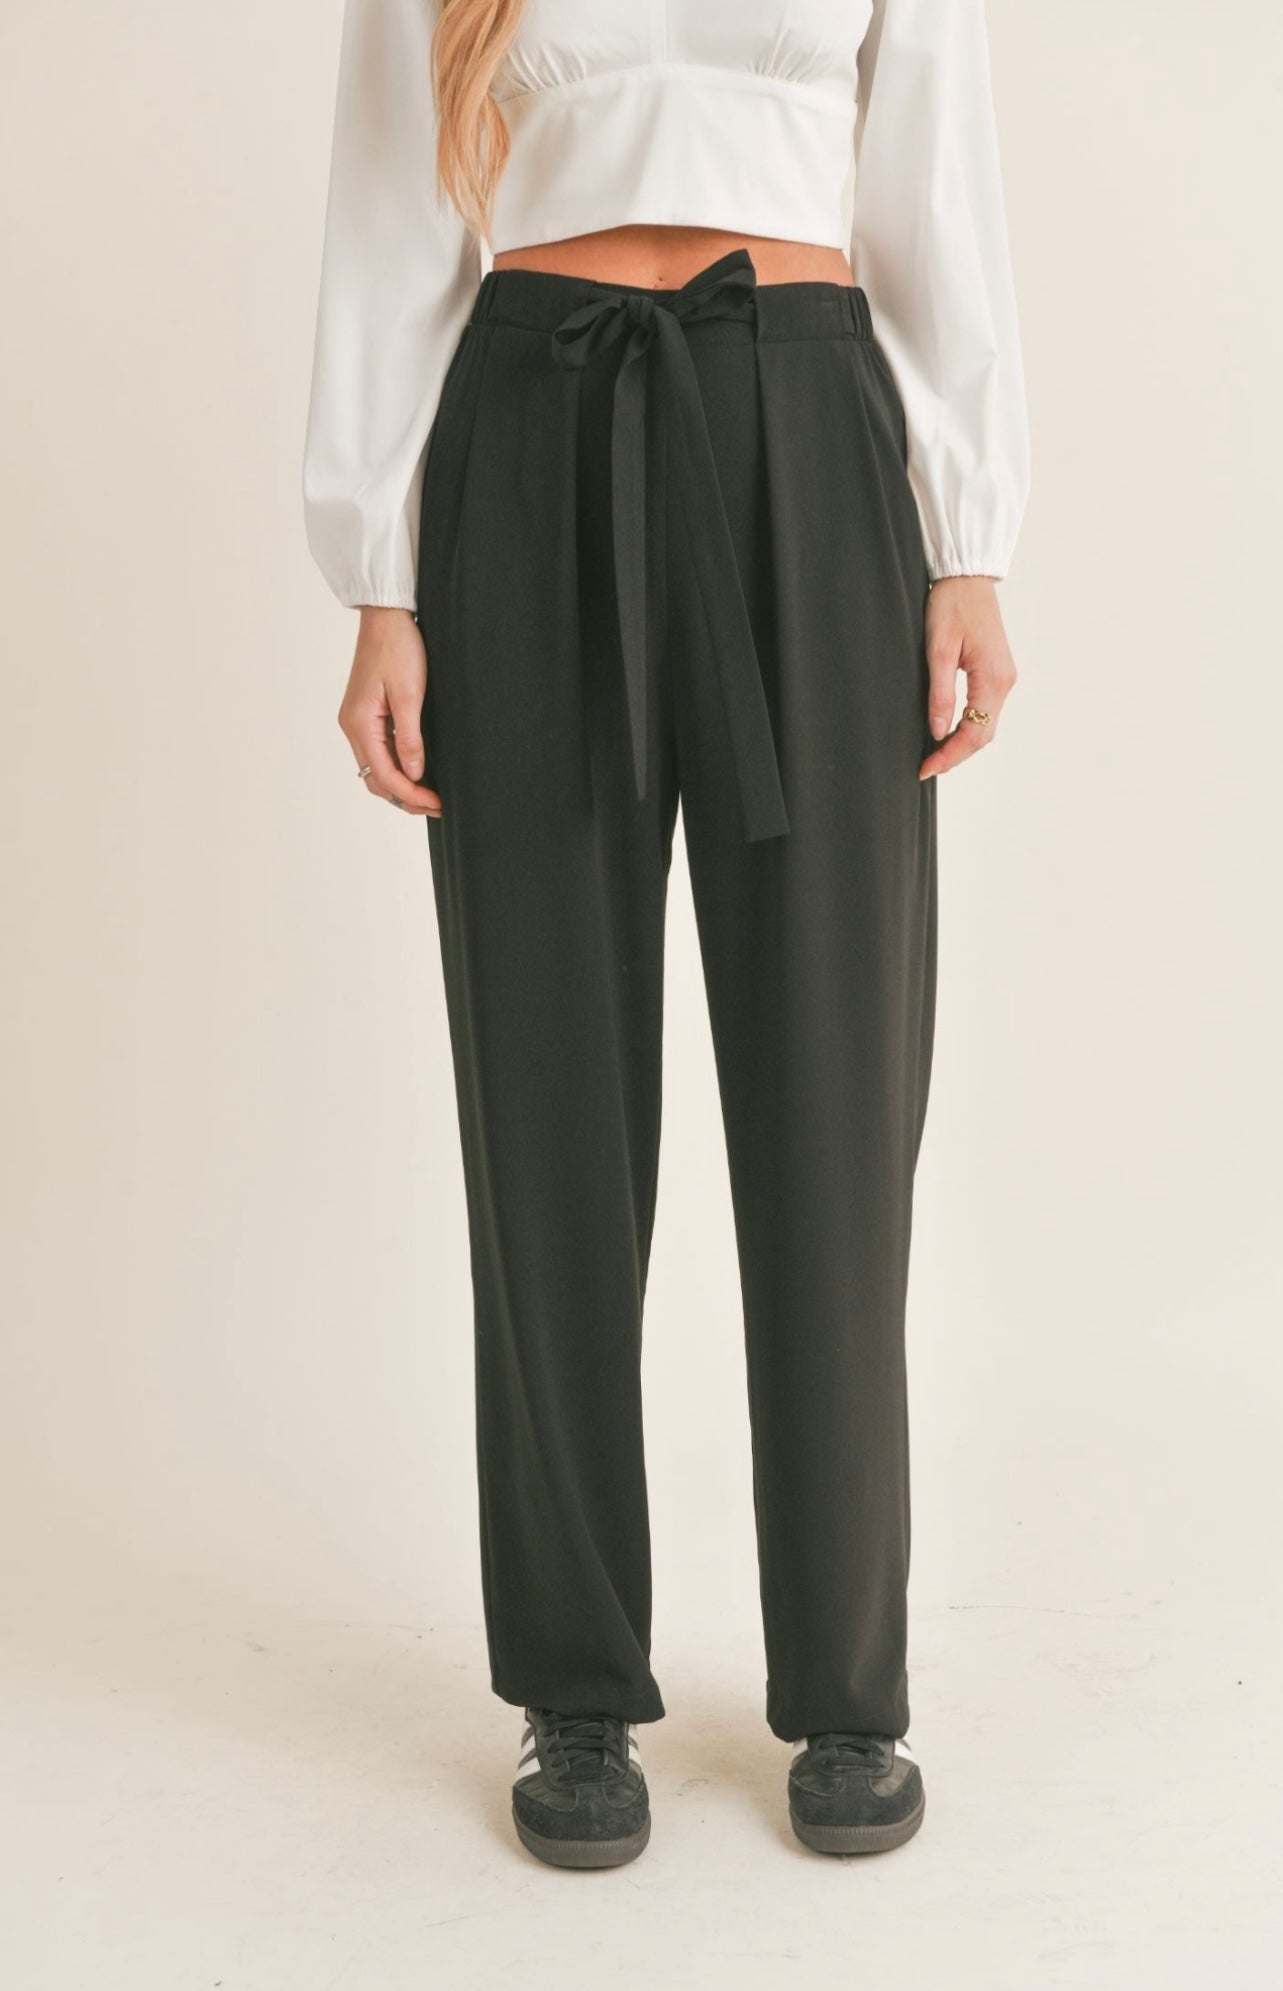 Sage the Label New Rules Wide Leg with Waist Ties Pants